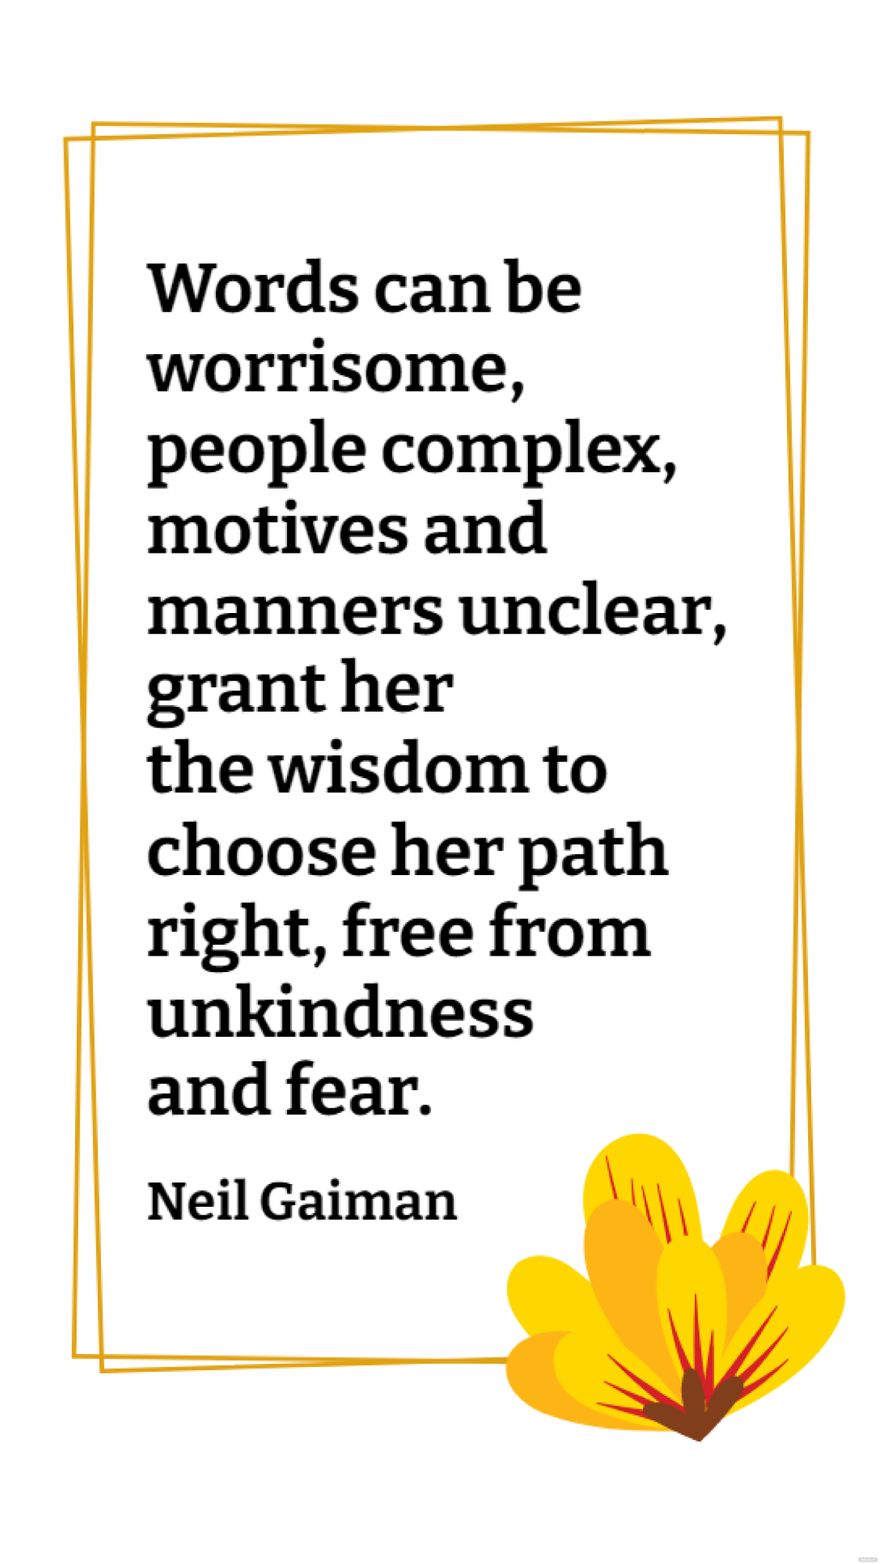 Neil Gaiman - Words can be worrisome, people complex, motives and manners unclear, grant her the wisdom to choose her path right, from unkindness and fear.